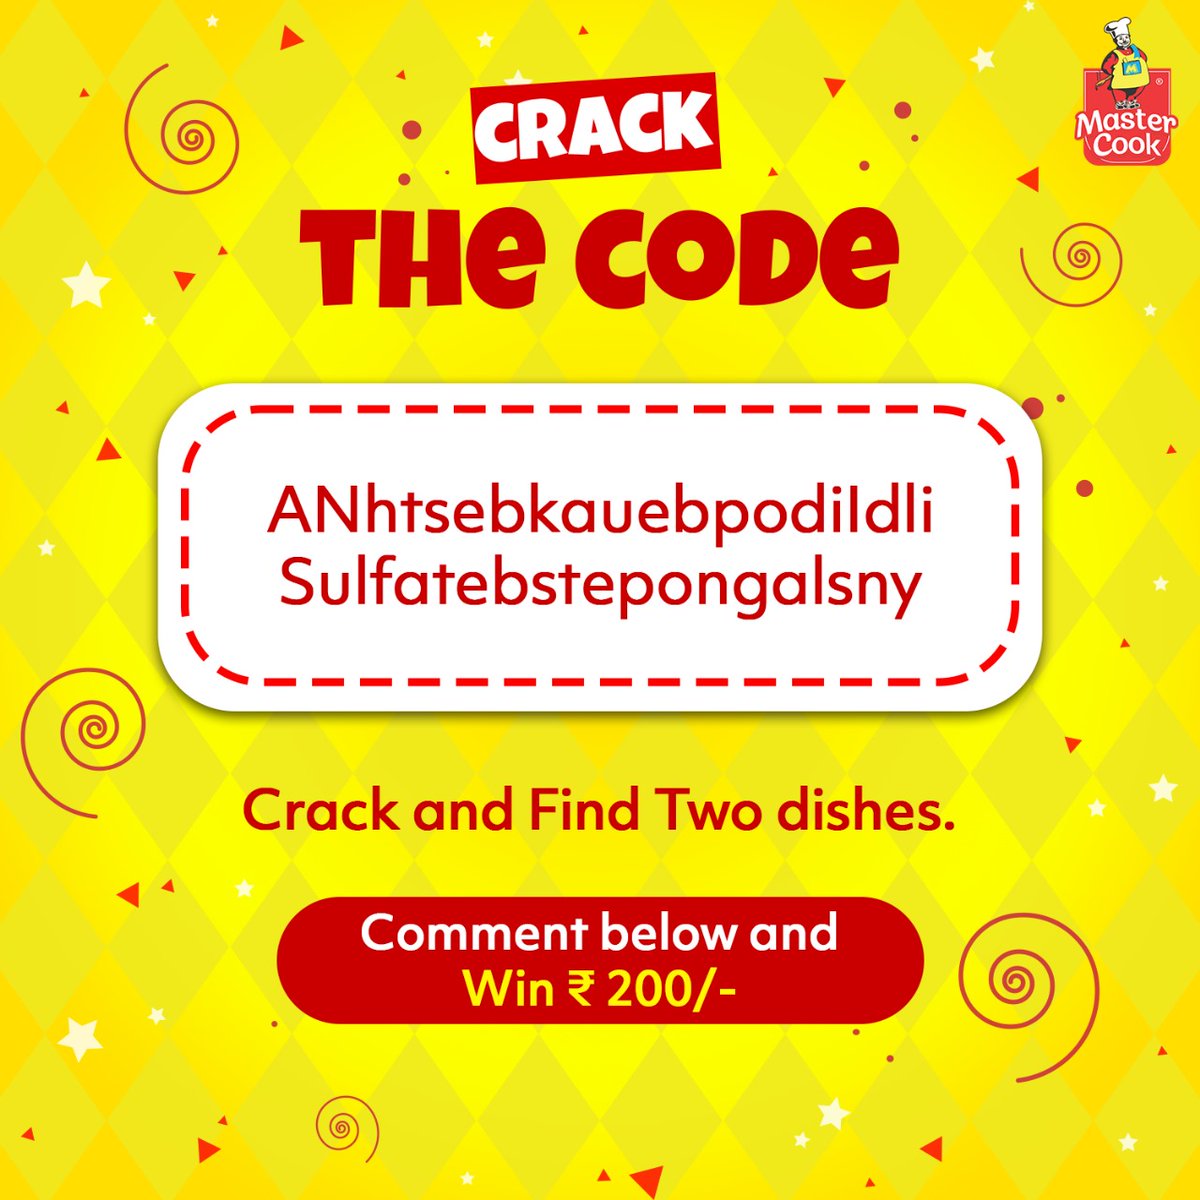 🕵️‍♂️✨ Join our 'Crack the Code' contest and indulge your taste buds in a flavorful challenge. Are you up for the culinary code-breaker challenge? The winner will receive a reward of 200/- #GuessTheRiddle #BrainTeaser #PuzzleTime #riddles #mindriddles #game #riddlemethis